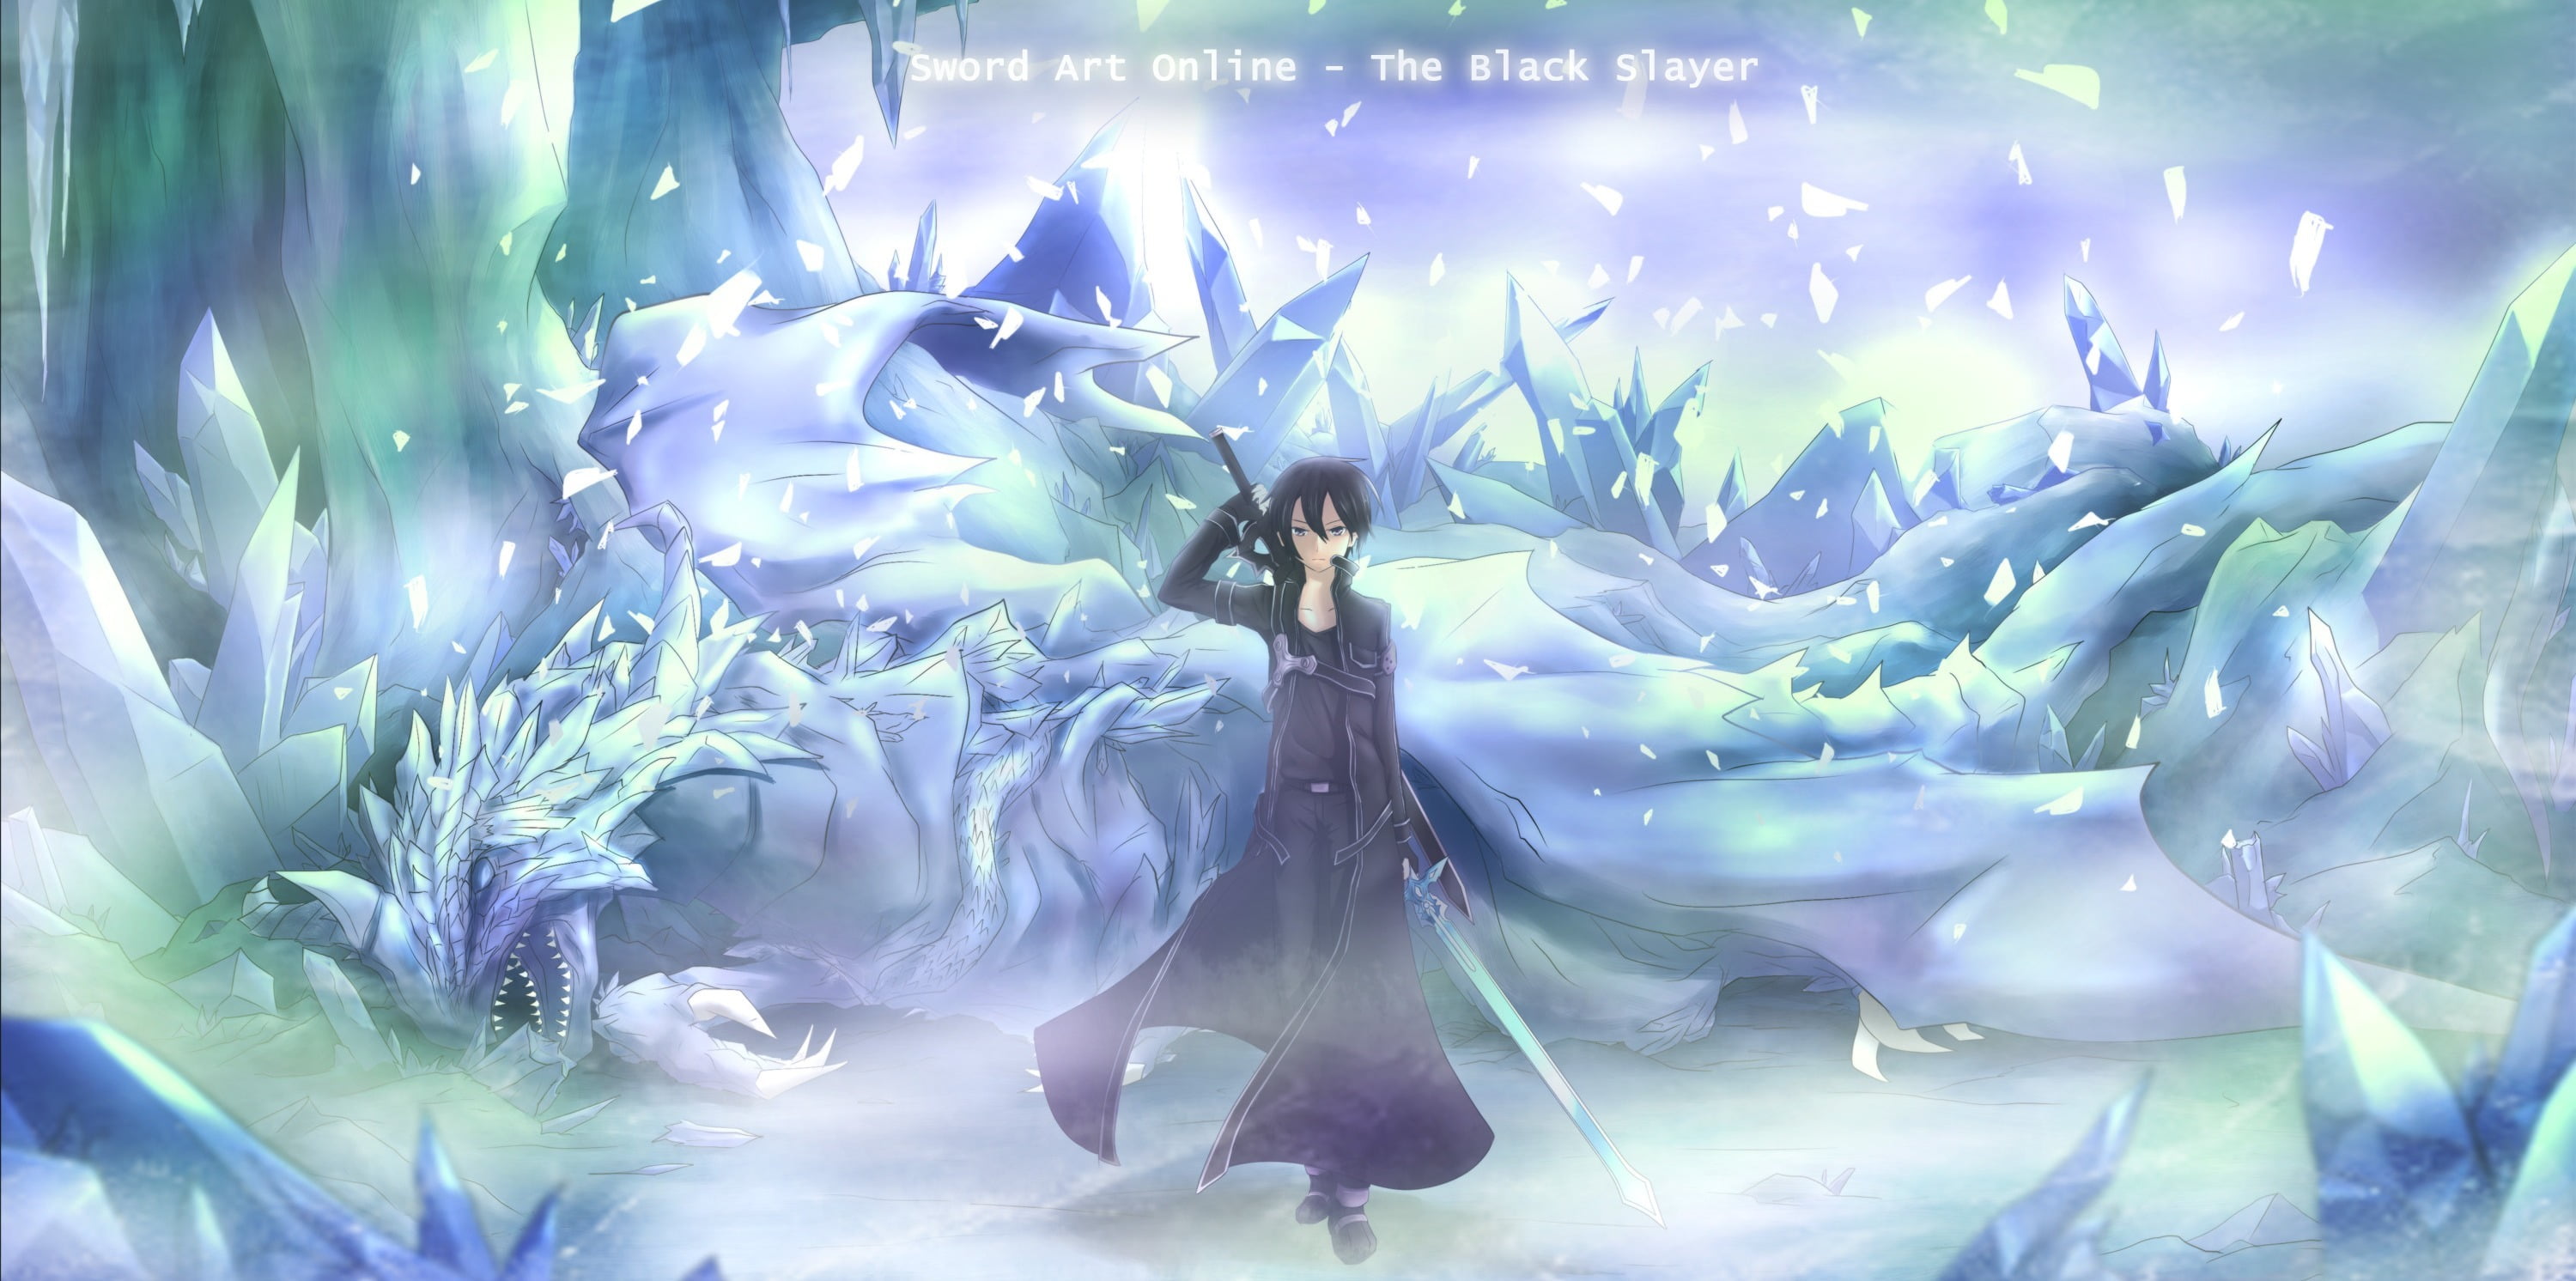 Kirito from Sword Art Online, cold, ice, weapons, dragon, anime